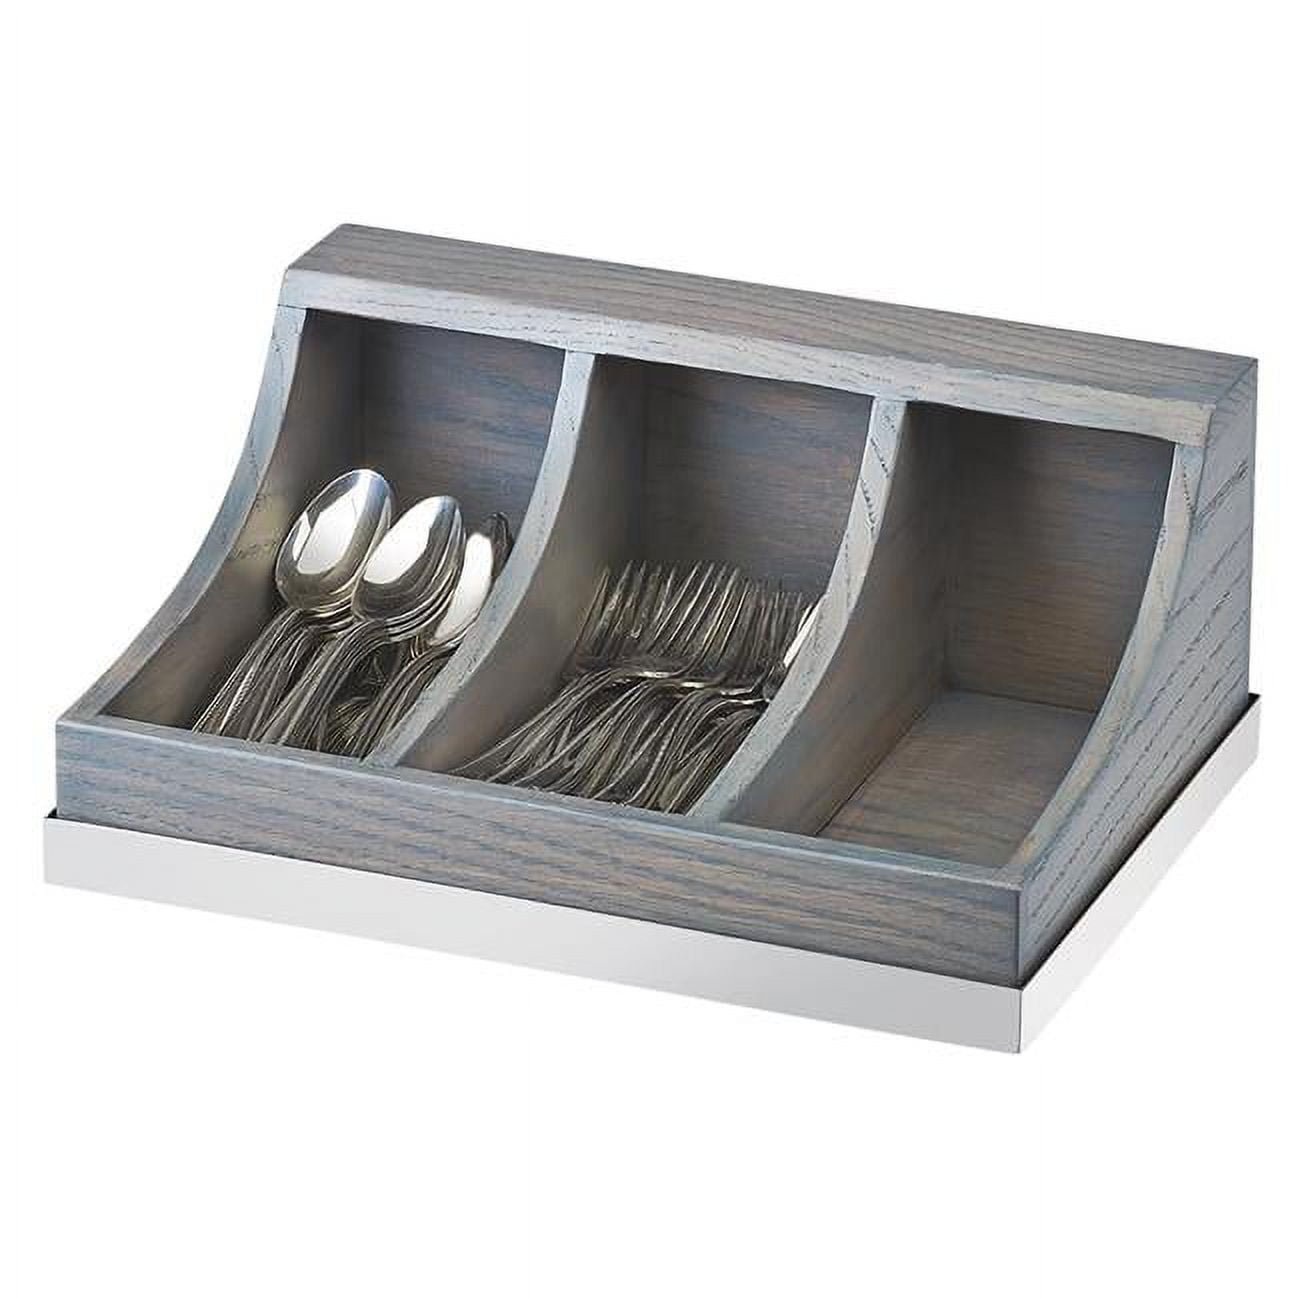 Picture of Cal Mil 3802-83 Ashwood 3 Section Gray Oak Wood Flatware Organizer - 13.75 x 10 x 6 in.